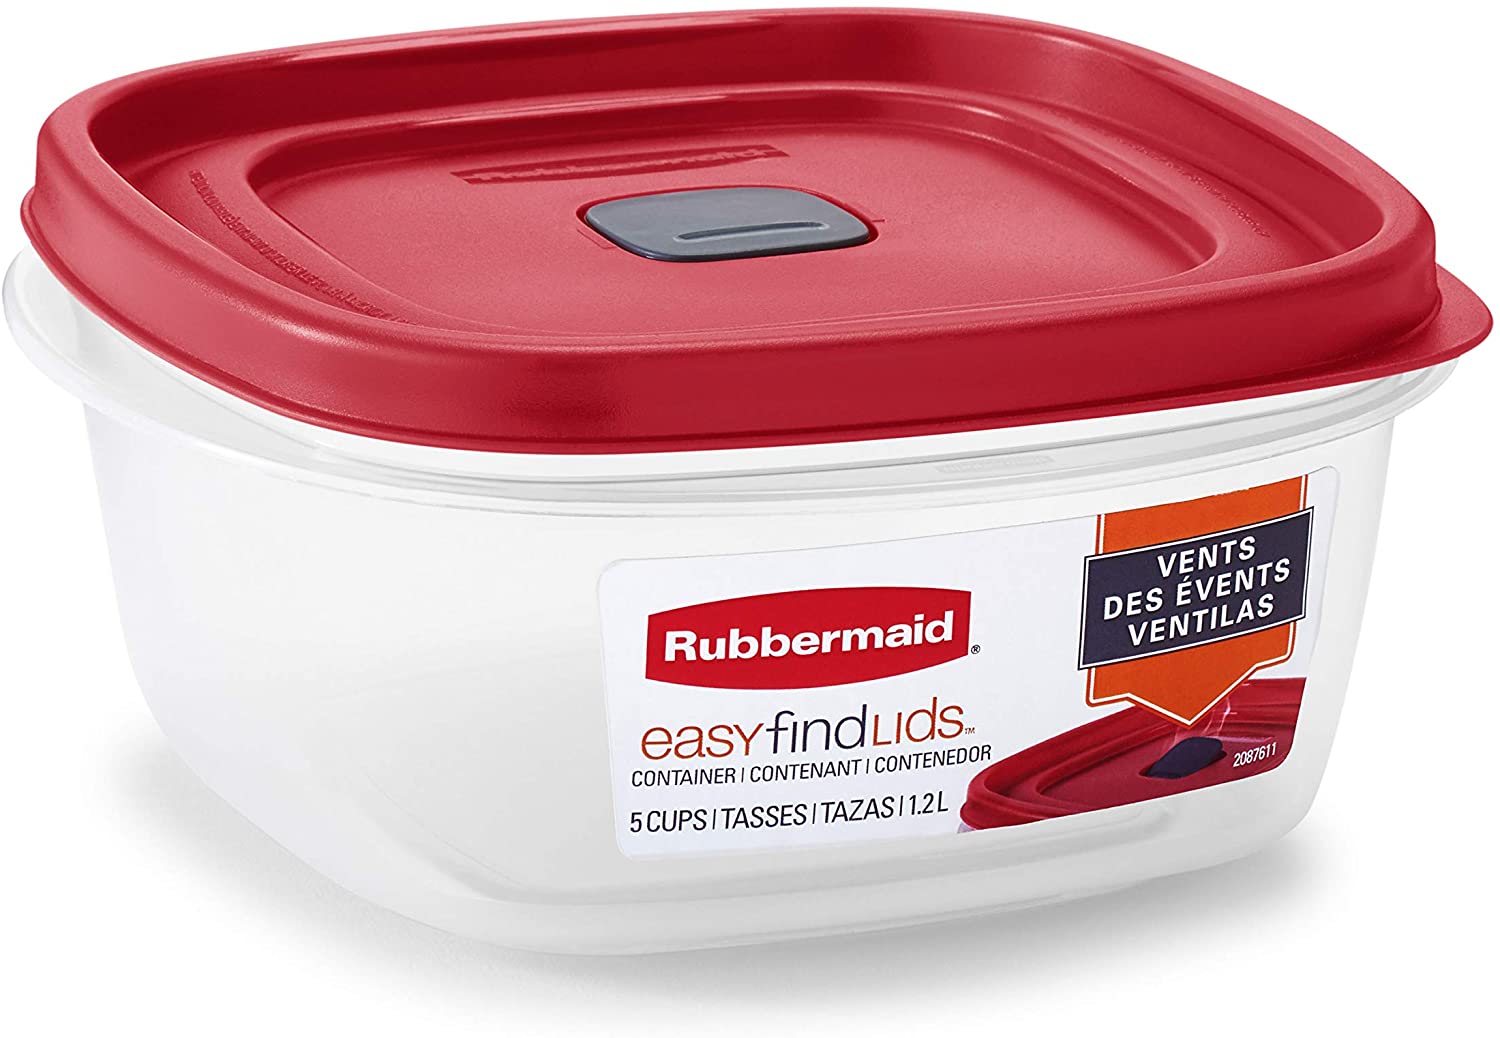 Rubbermaid Wrap N' Craft Plastic Wrapping Paper Holder Container (Open Box)  | eBay